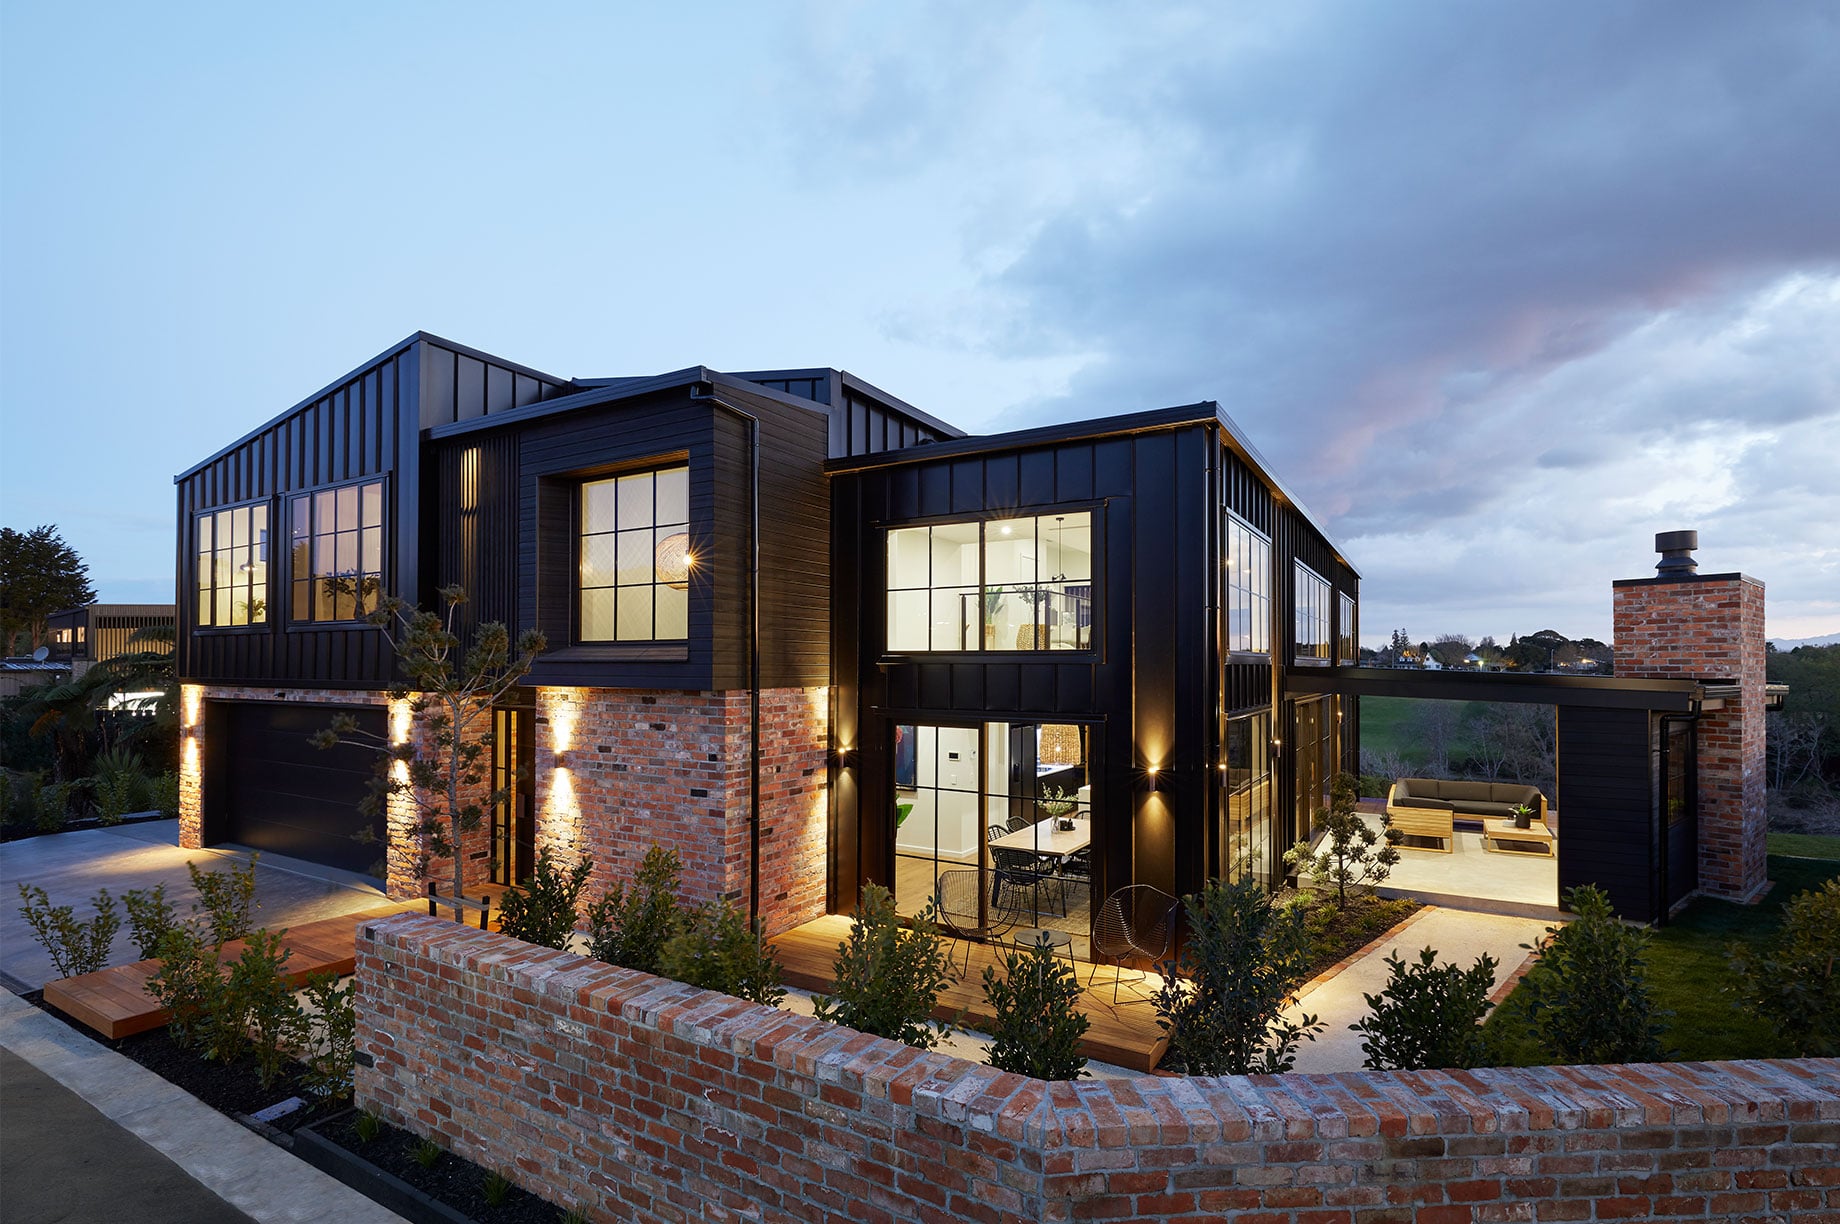 Black and brick home exterior in the evening